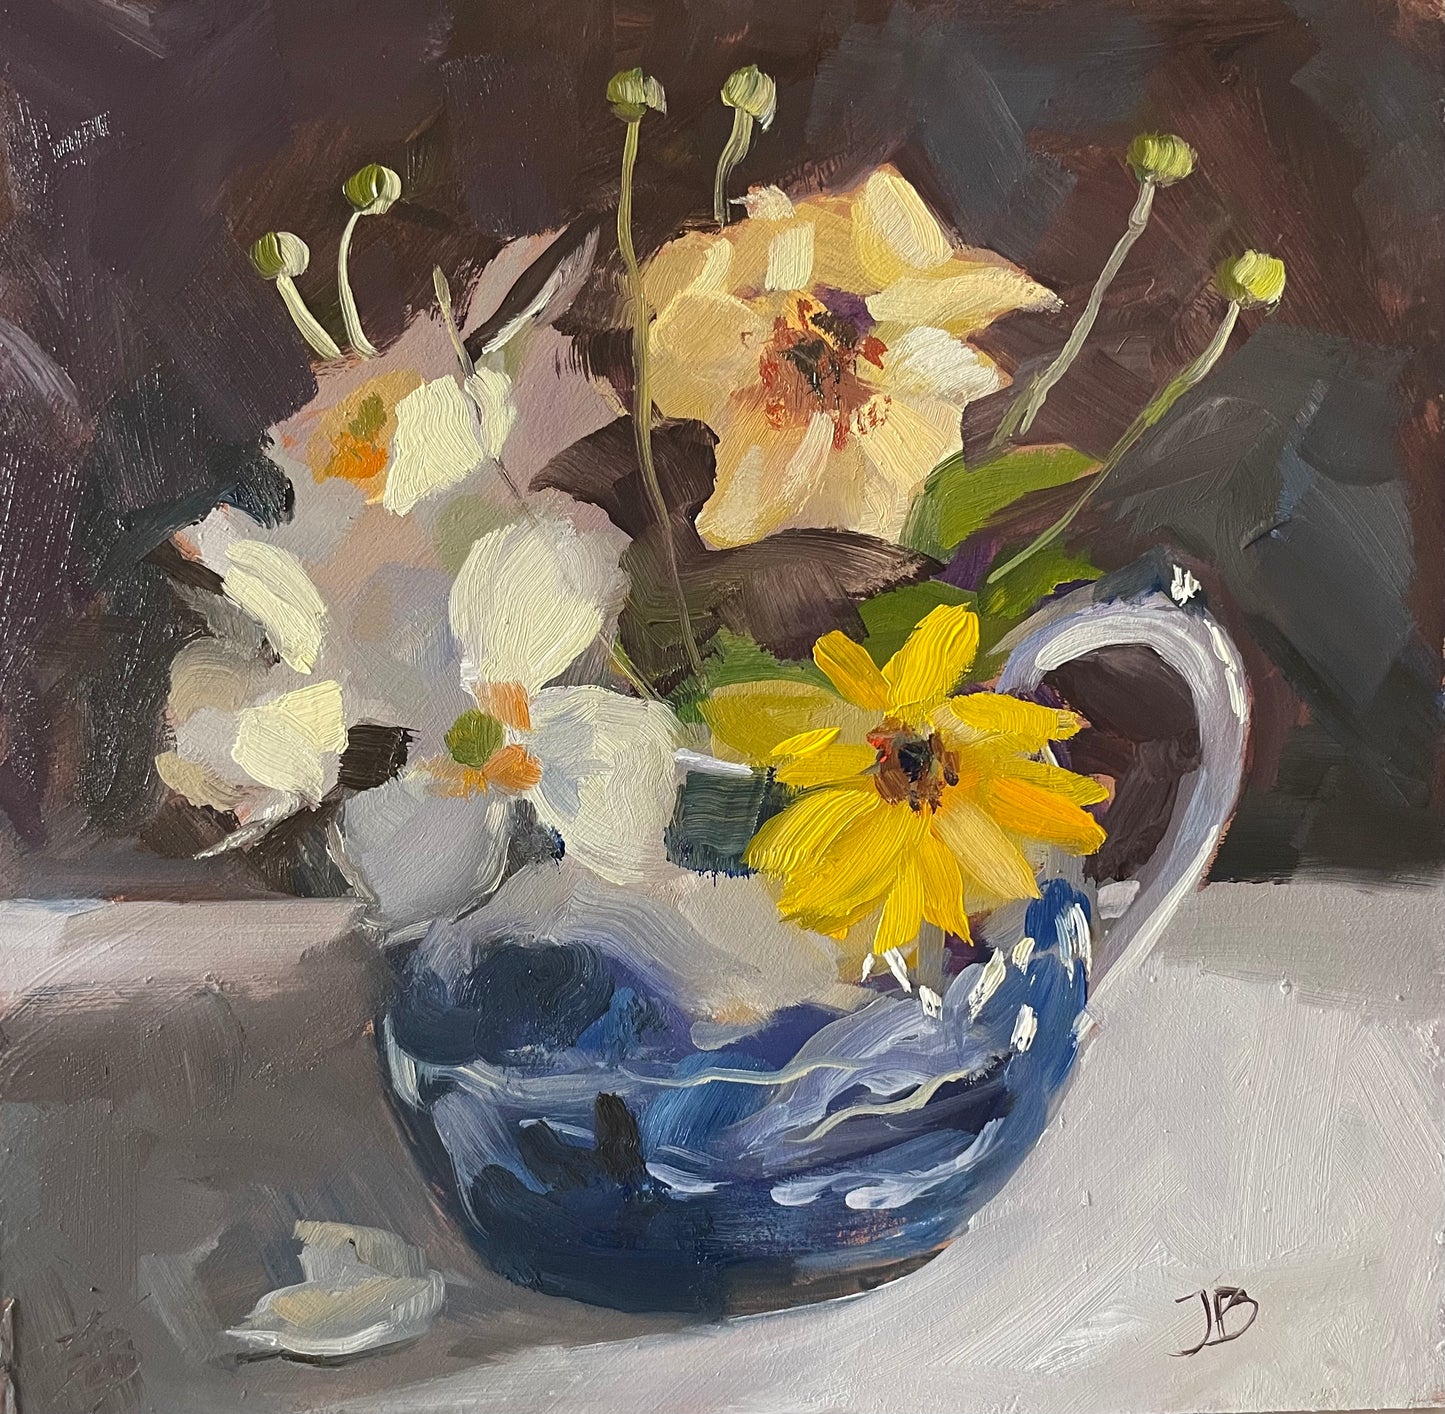 Garden flowers in a blue and white jug original oil painting.